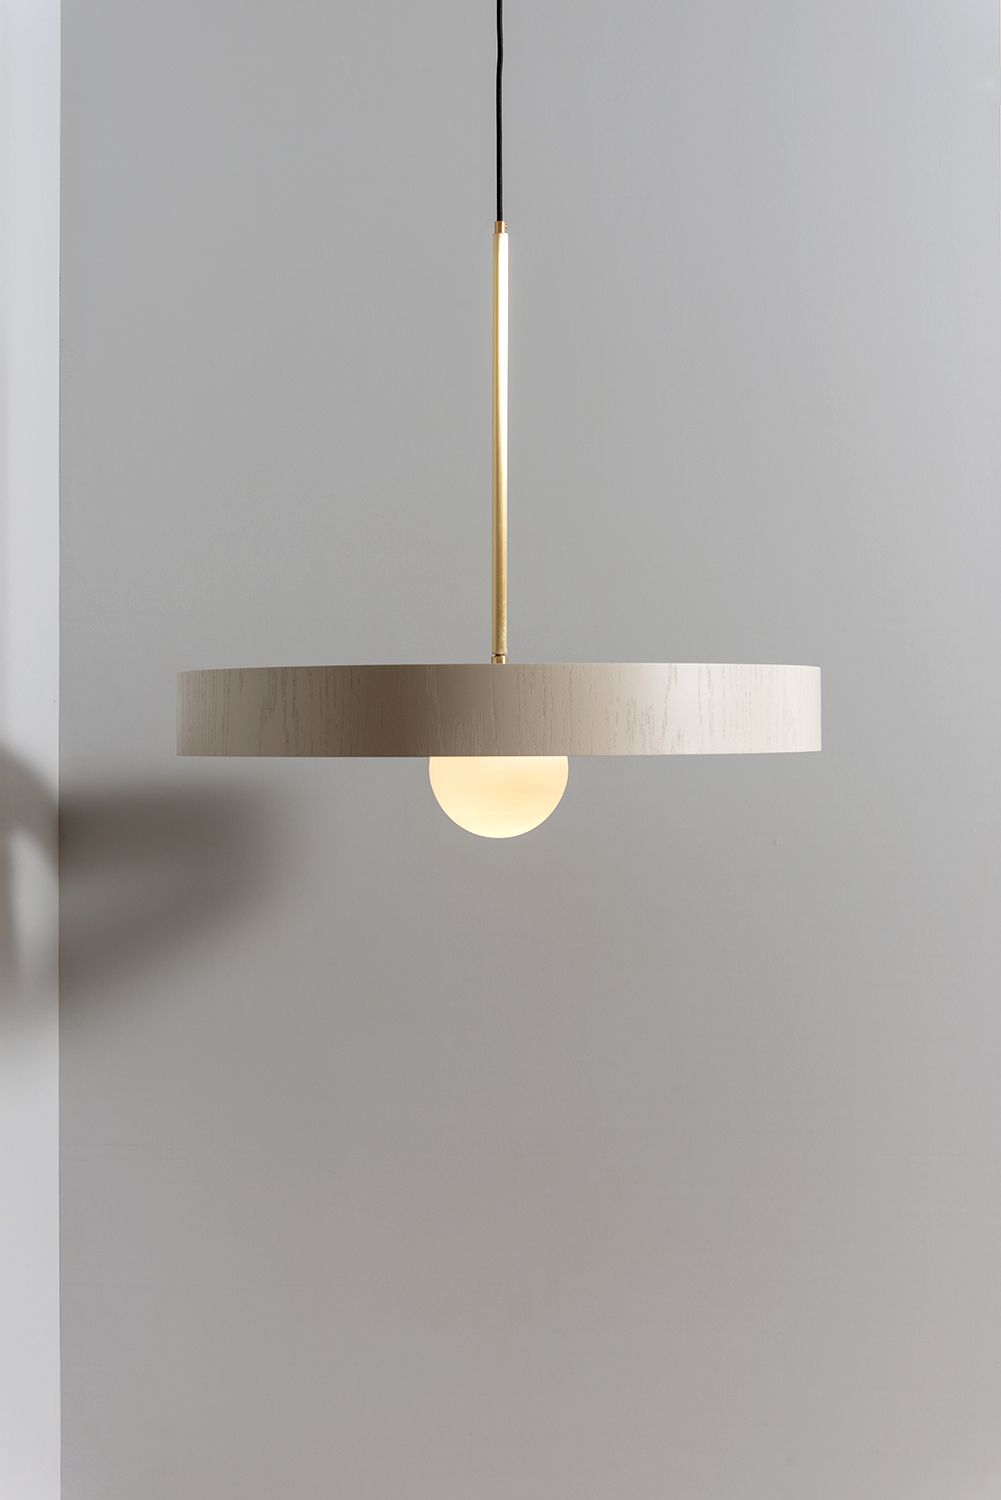 Asaf Weinbroom’s Latest Lighting Collection | Yellowtrace